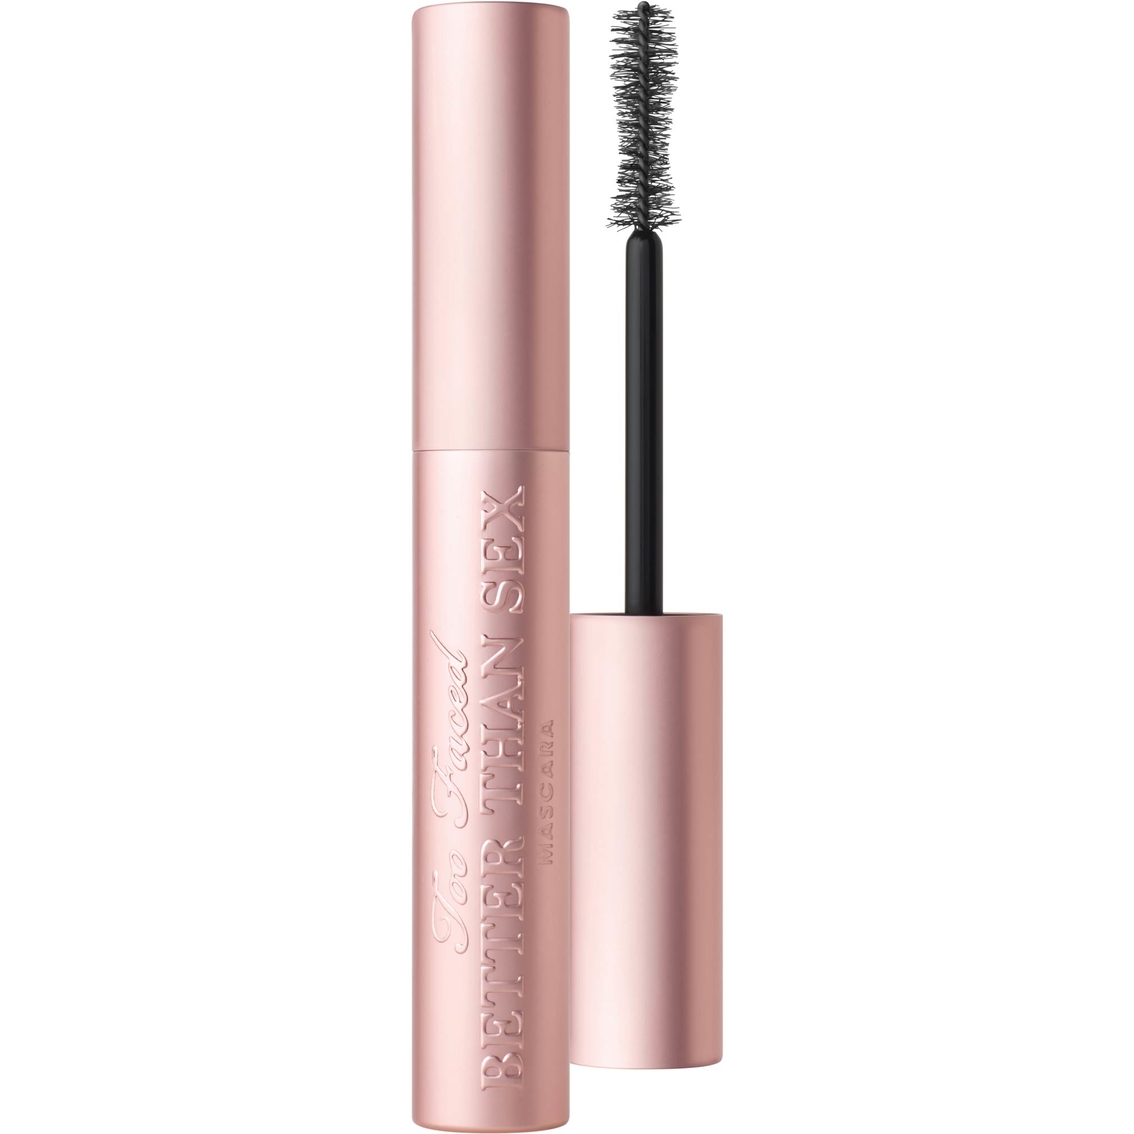 Too Faced Better Than Sex Mascara - Image 3 of 6